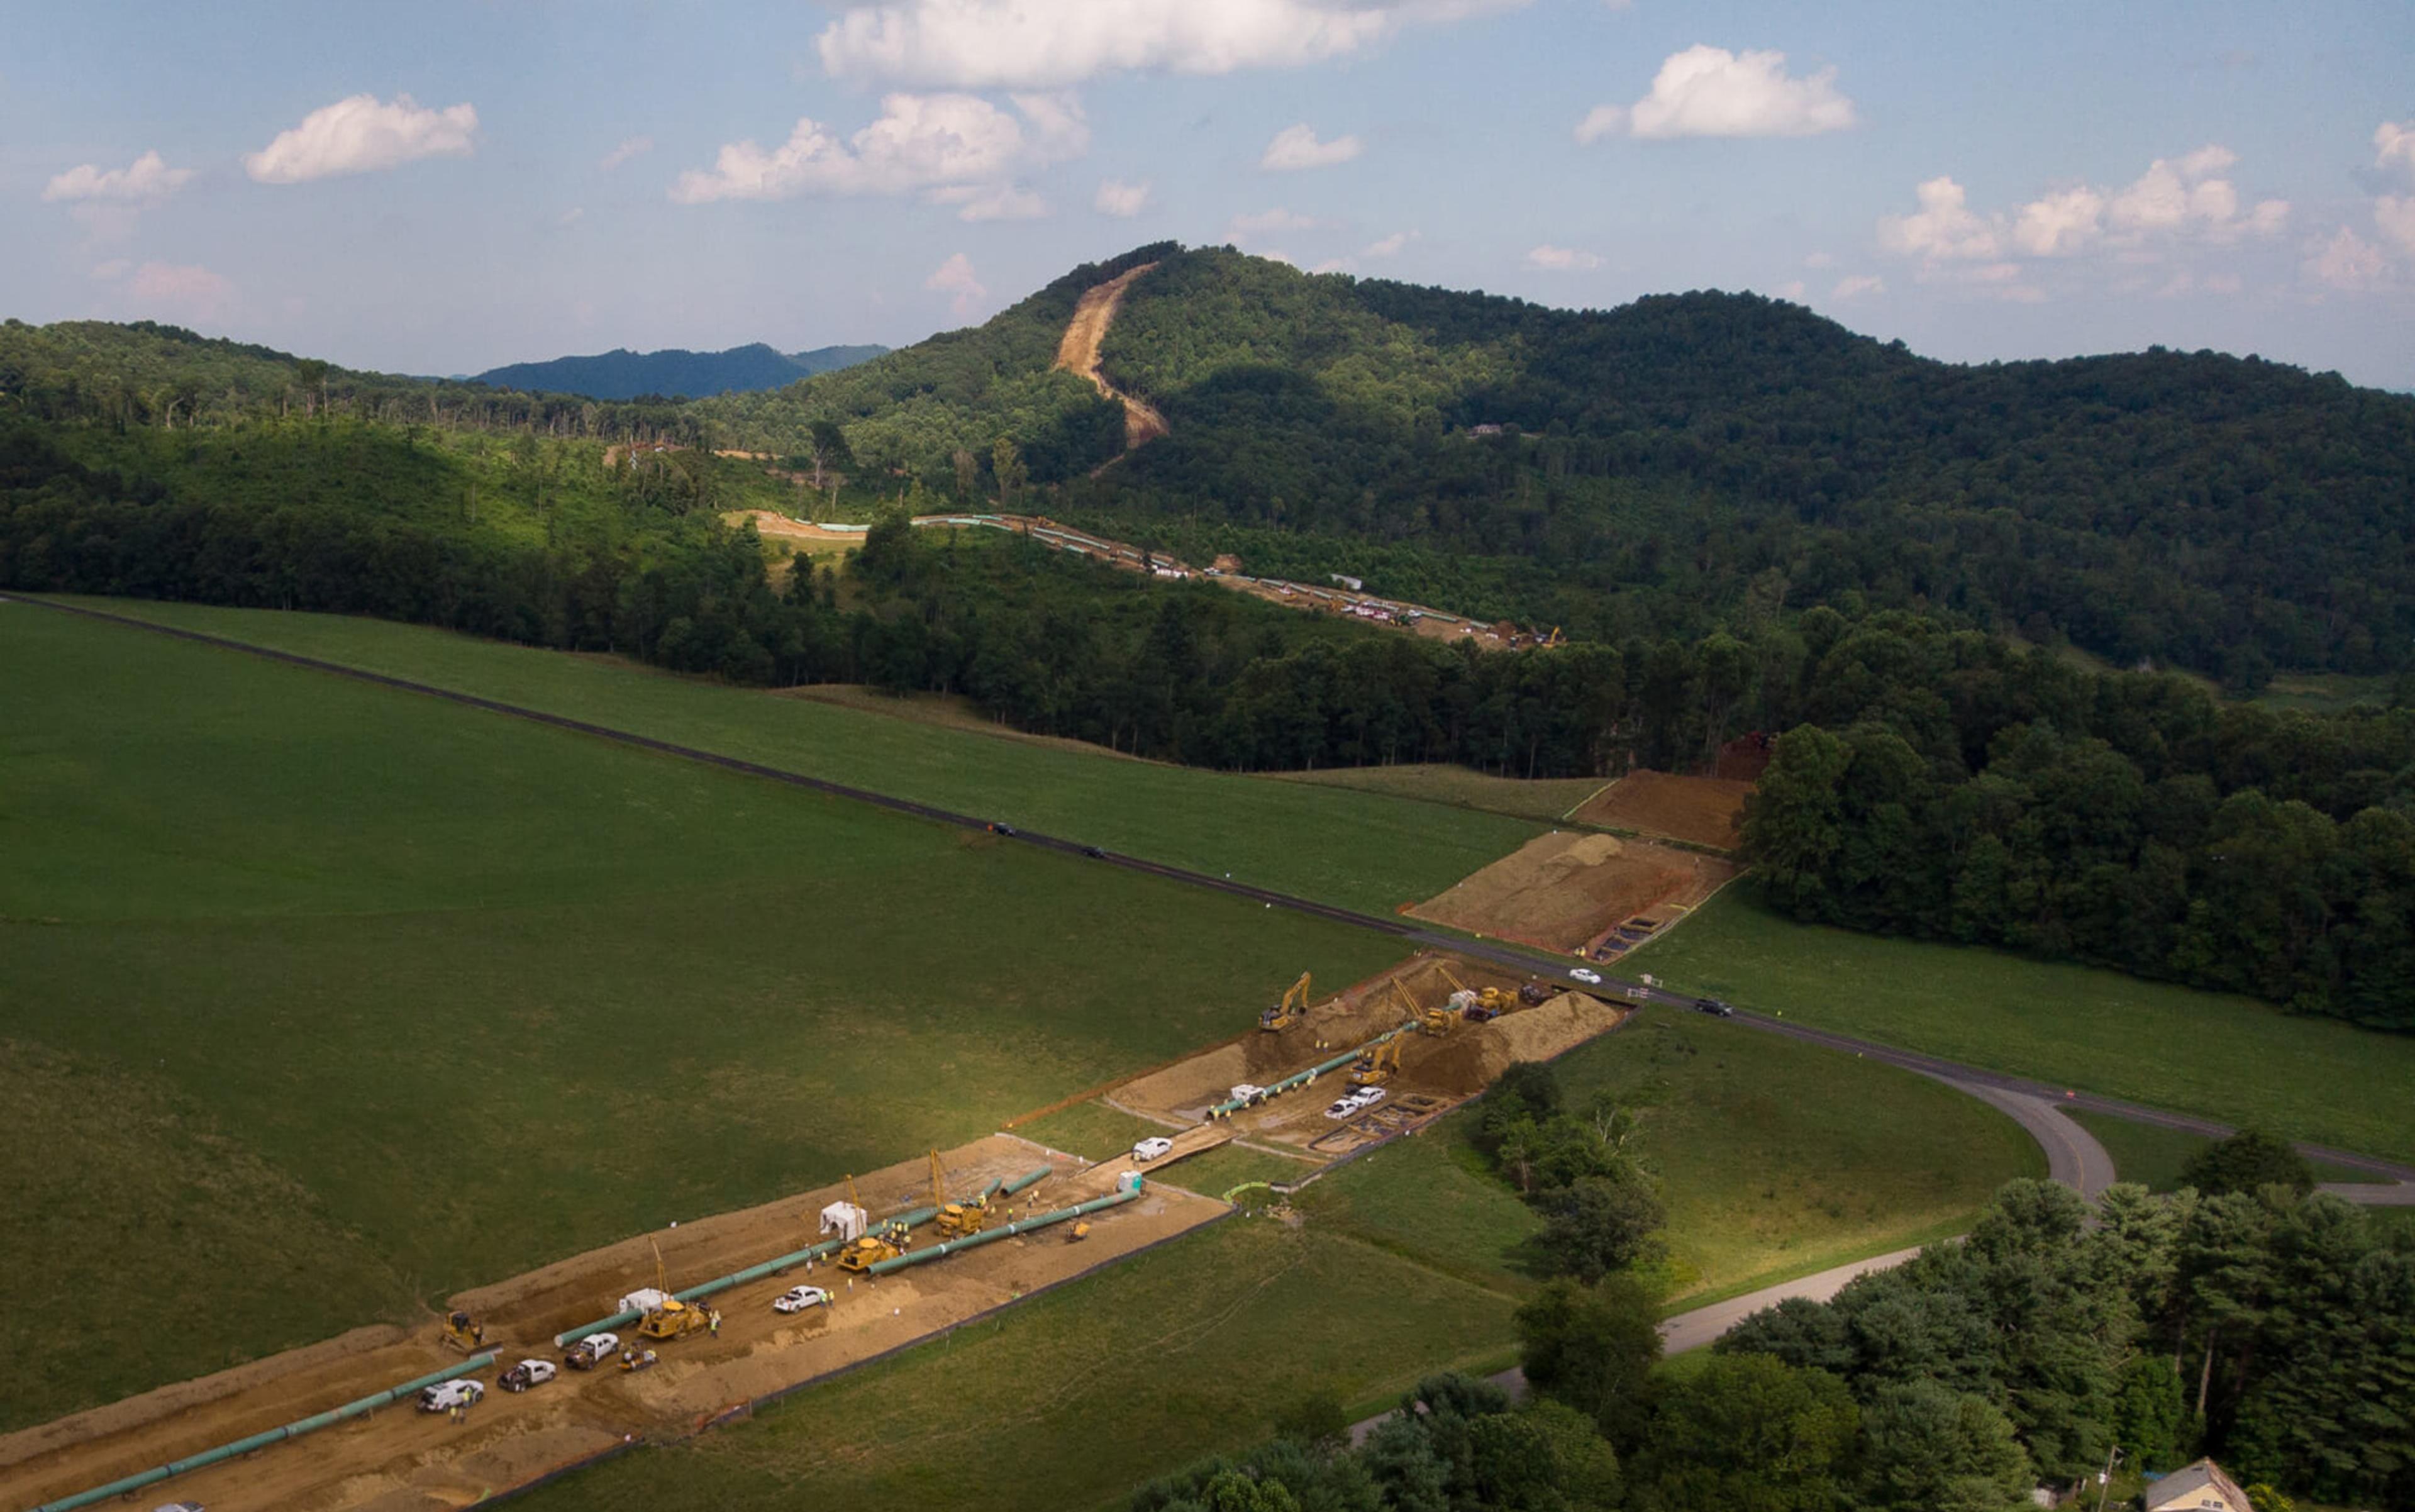 Aerial view of a large pipeline construction site with machinery and vehicles cutting through green fields and hills under a partly cloudy sky.